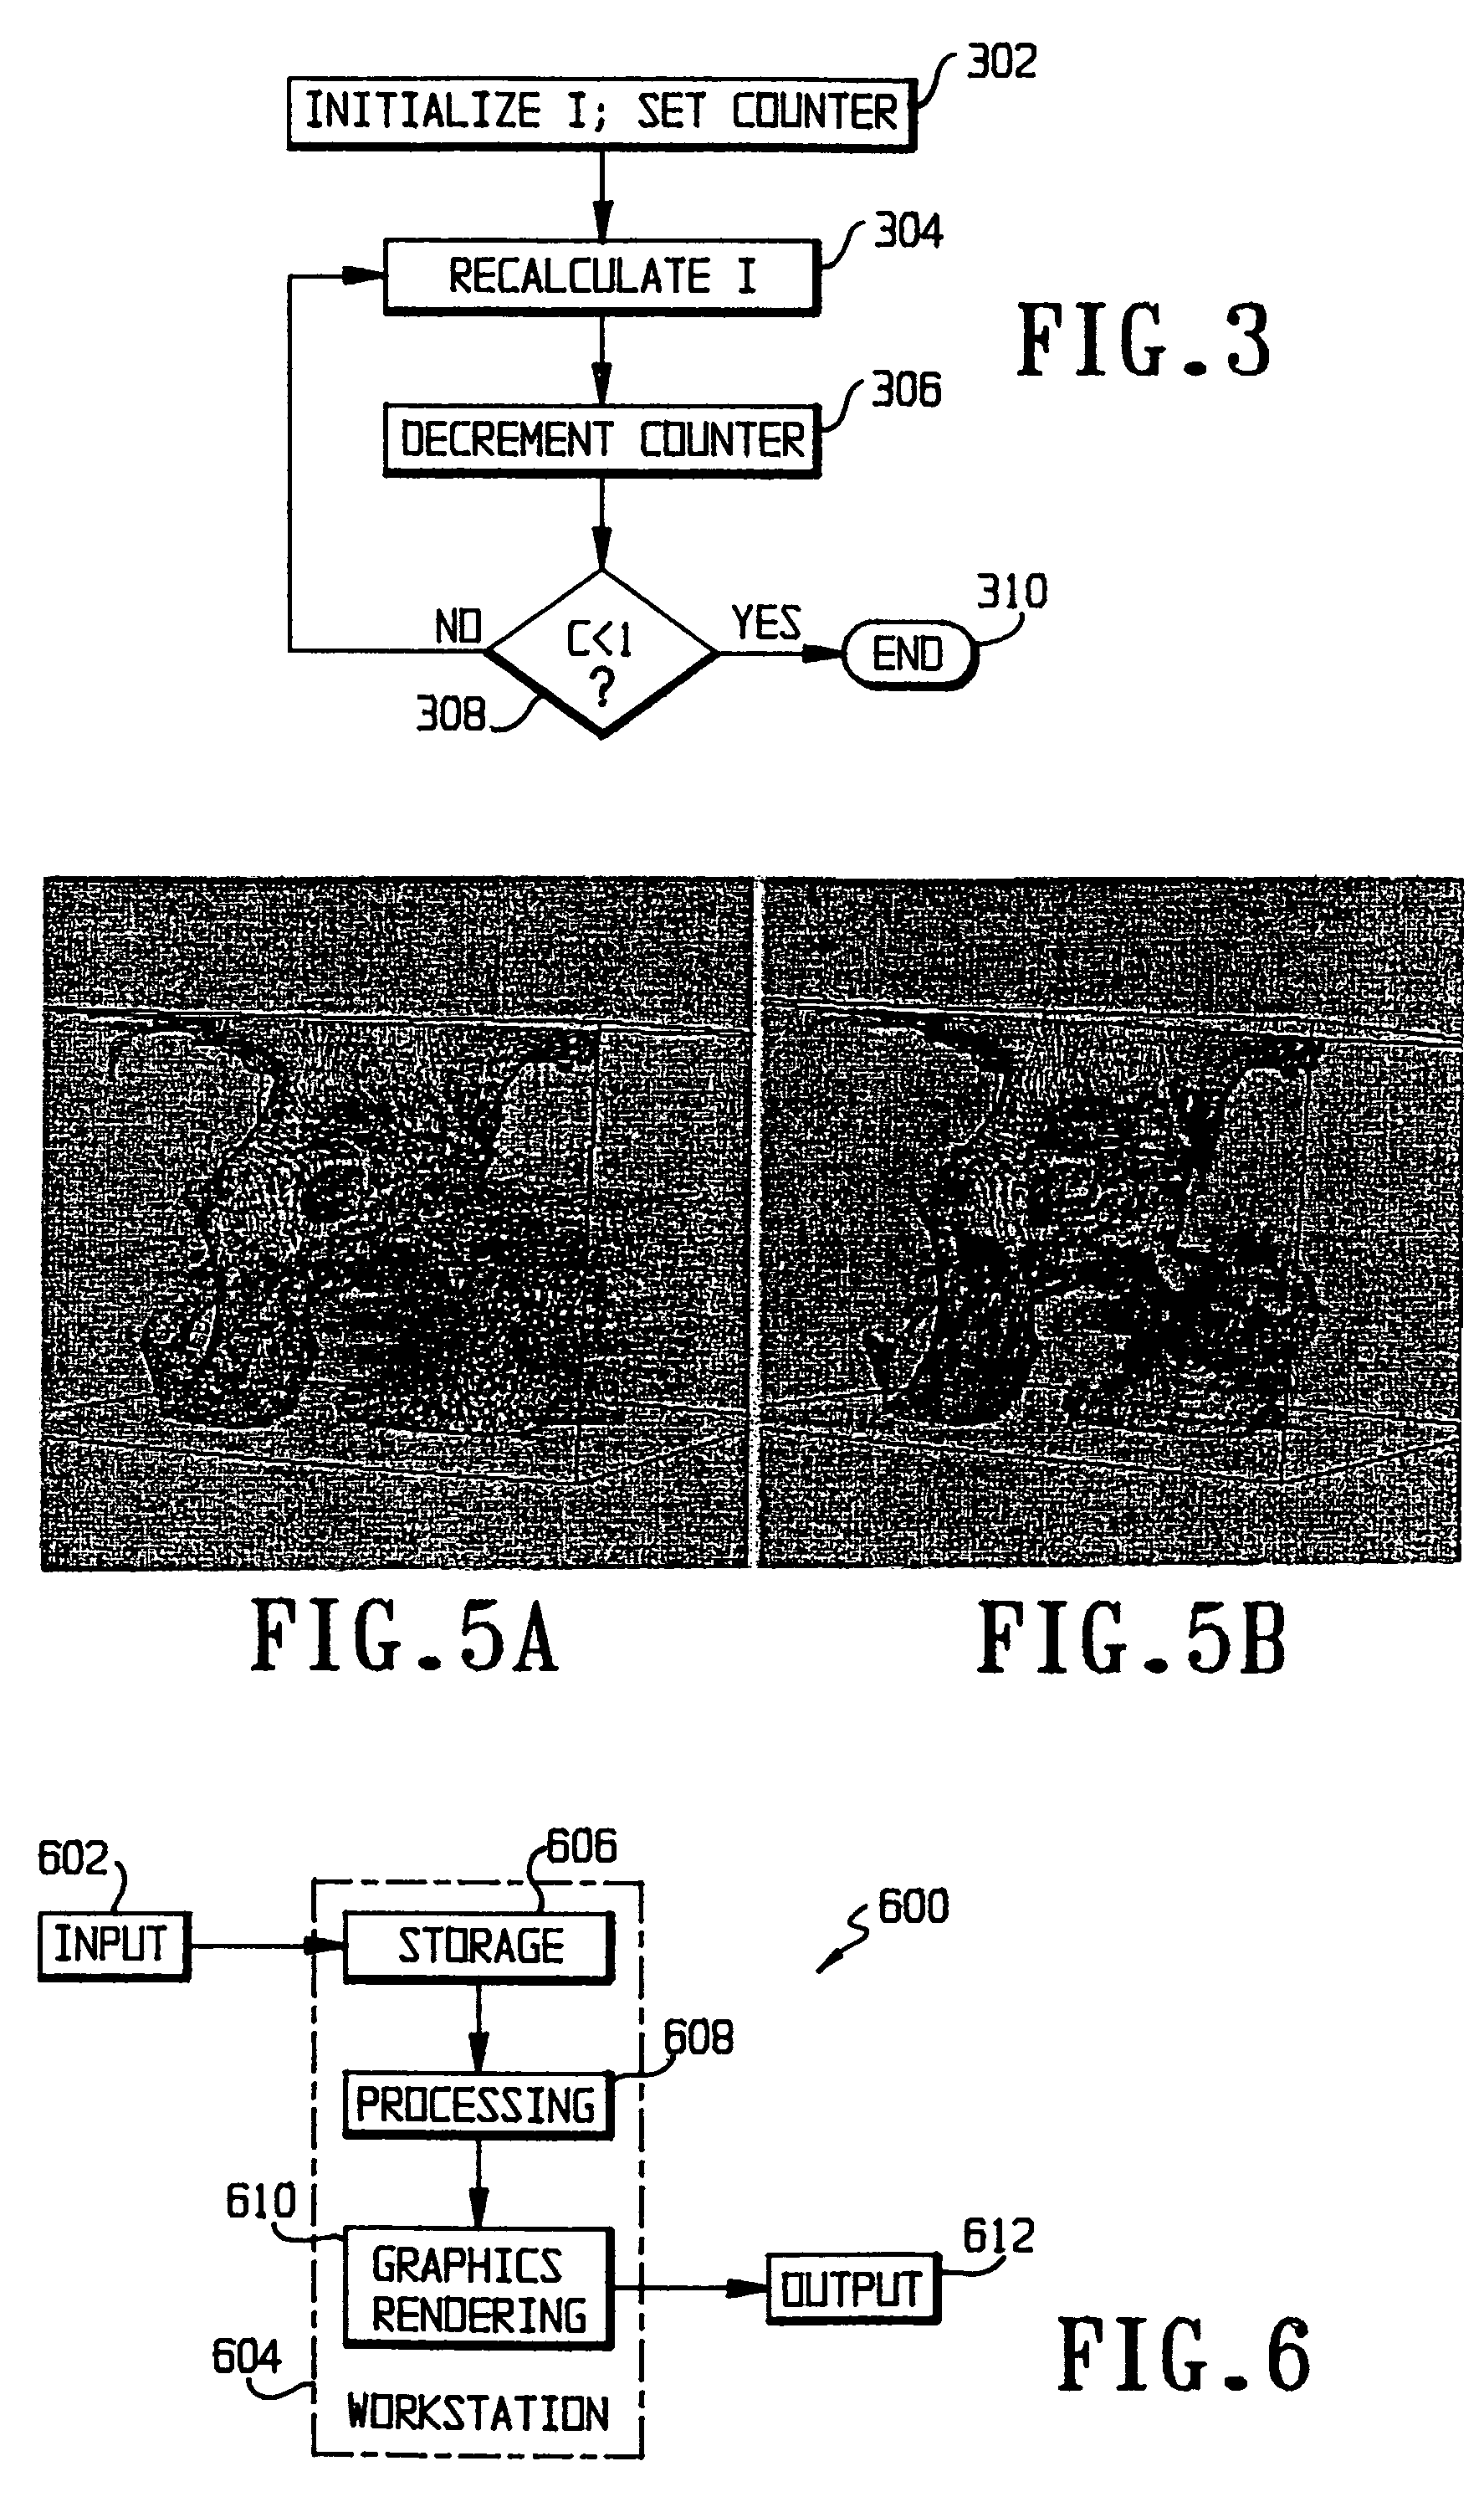 System and method for reducing or eliminating streak artifacts and illumination inhomogeneity in CT imaging